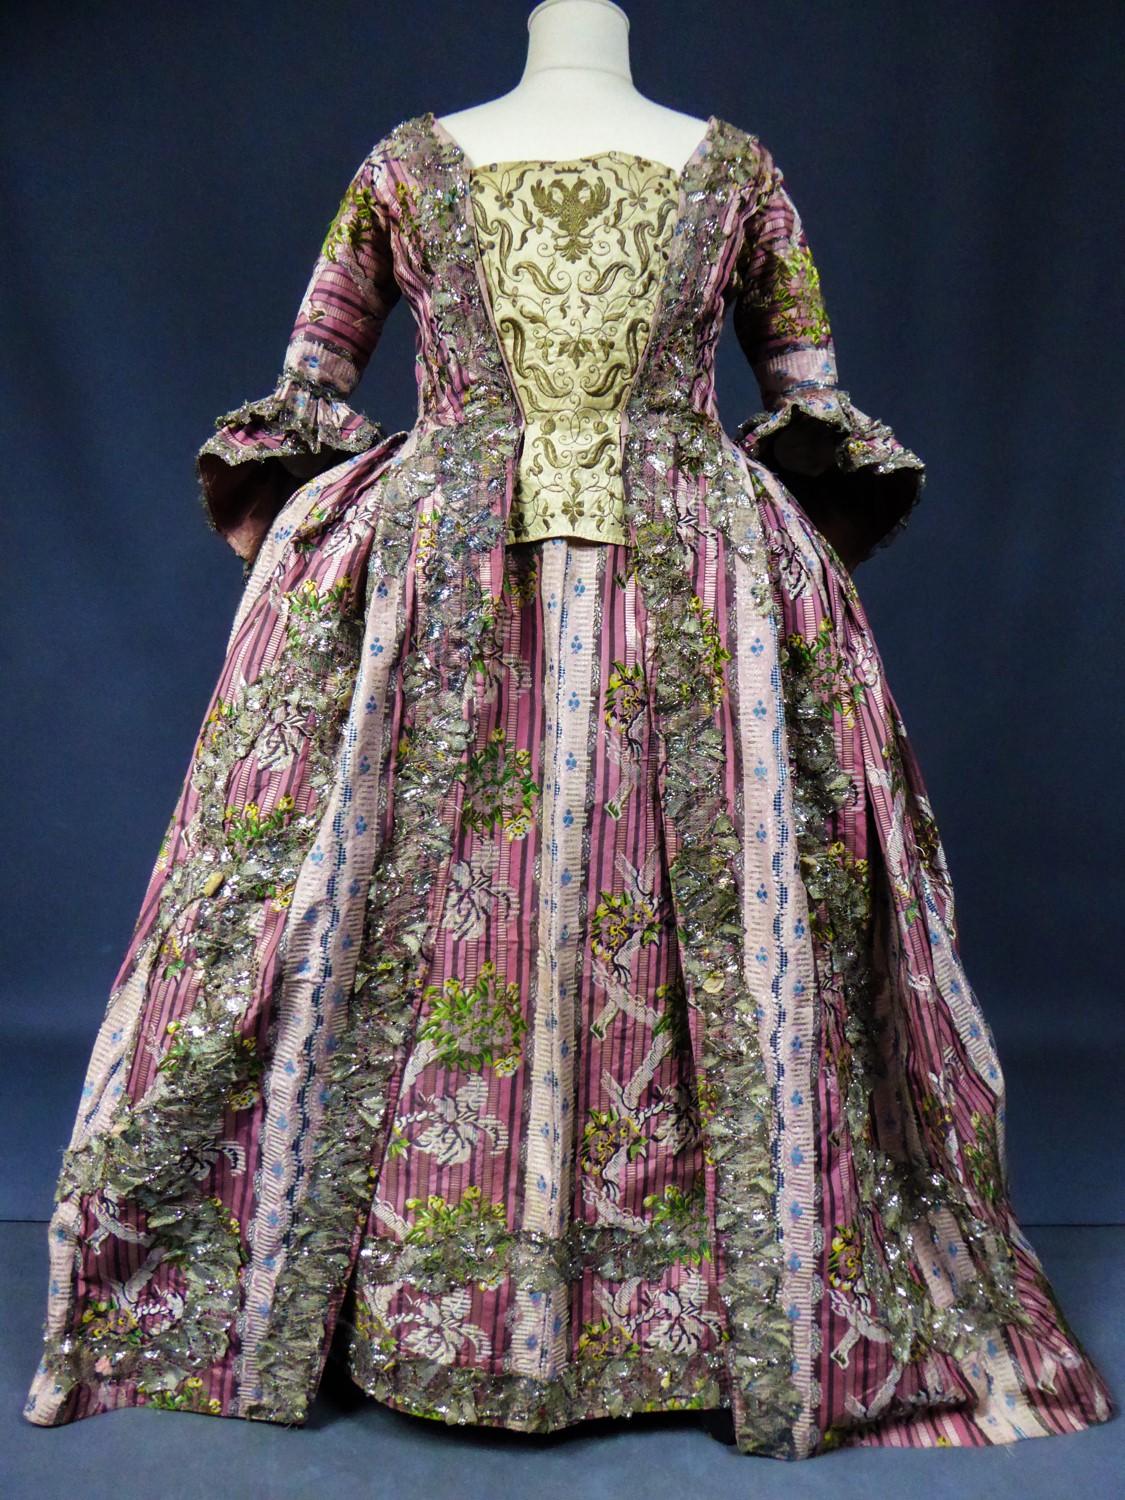 Circa 1765/1780
France-Paris Versailles

French court dress in silver flossed, fluted and brocaded silk or brocade. Coat open on a stomacher (sold separatly) and three-quarter sleeves with double rows of pagoda ruffles. Back with box pleats said 